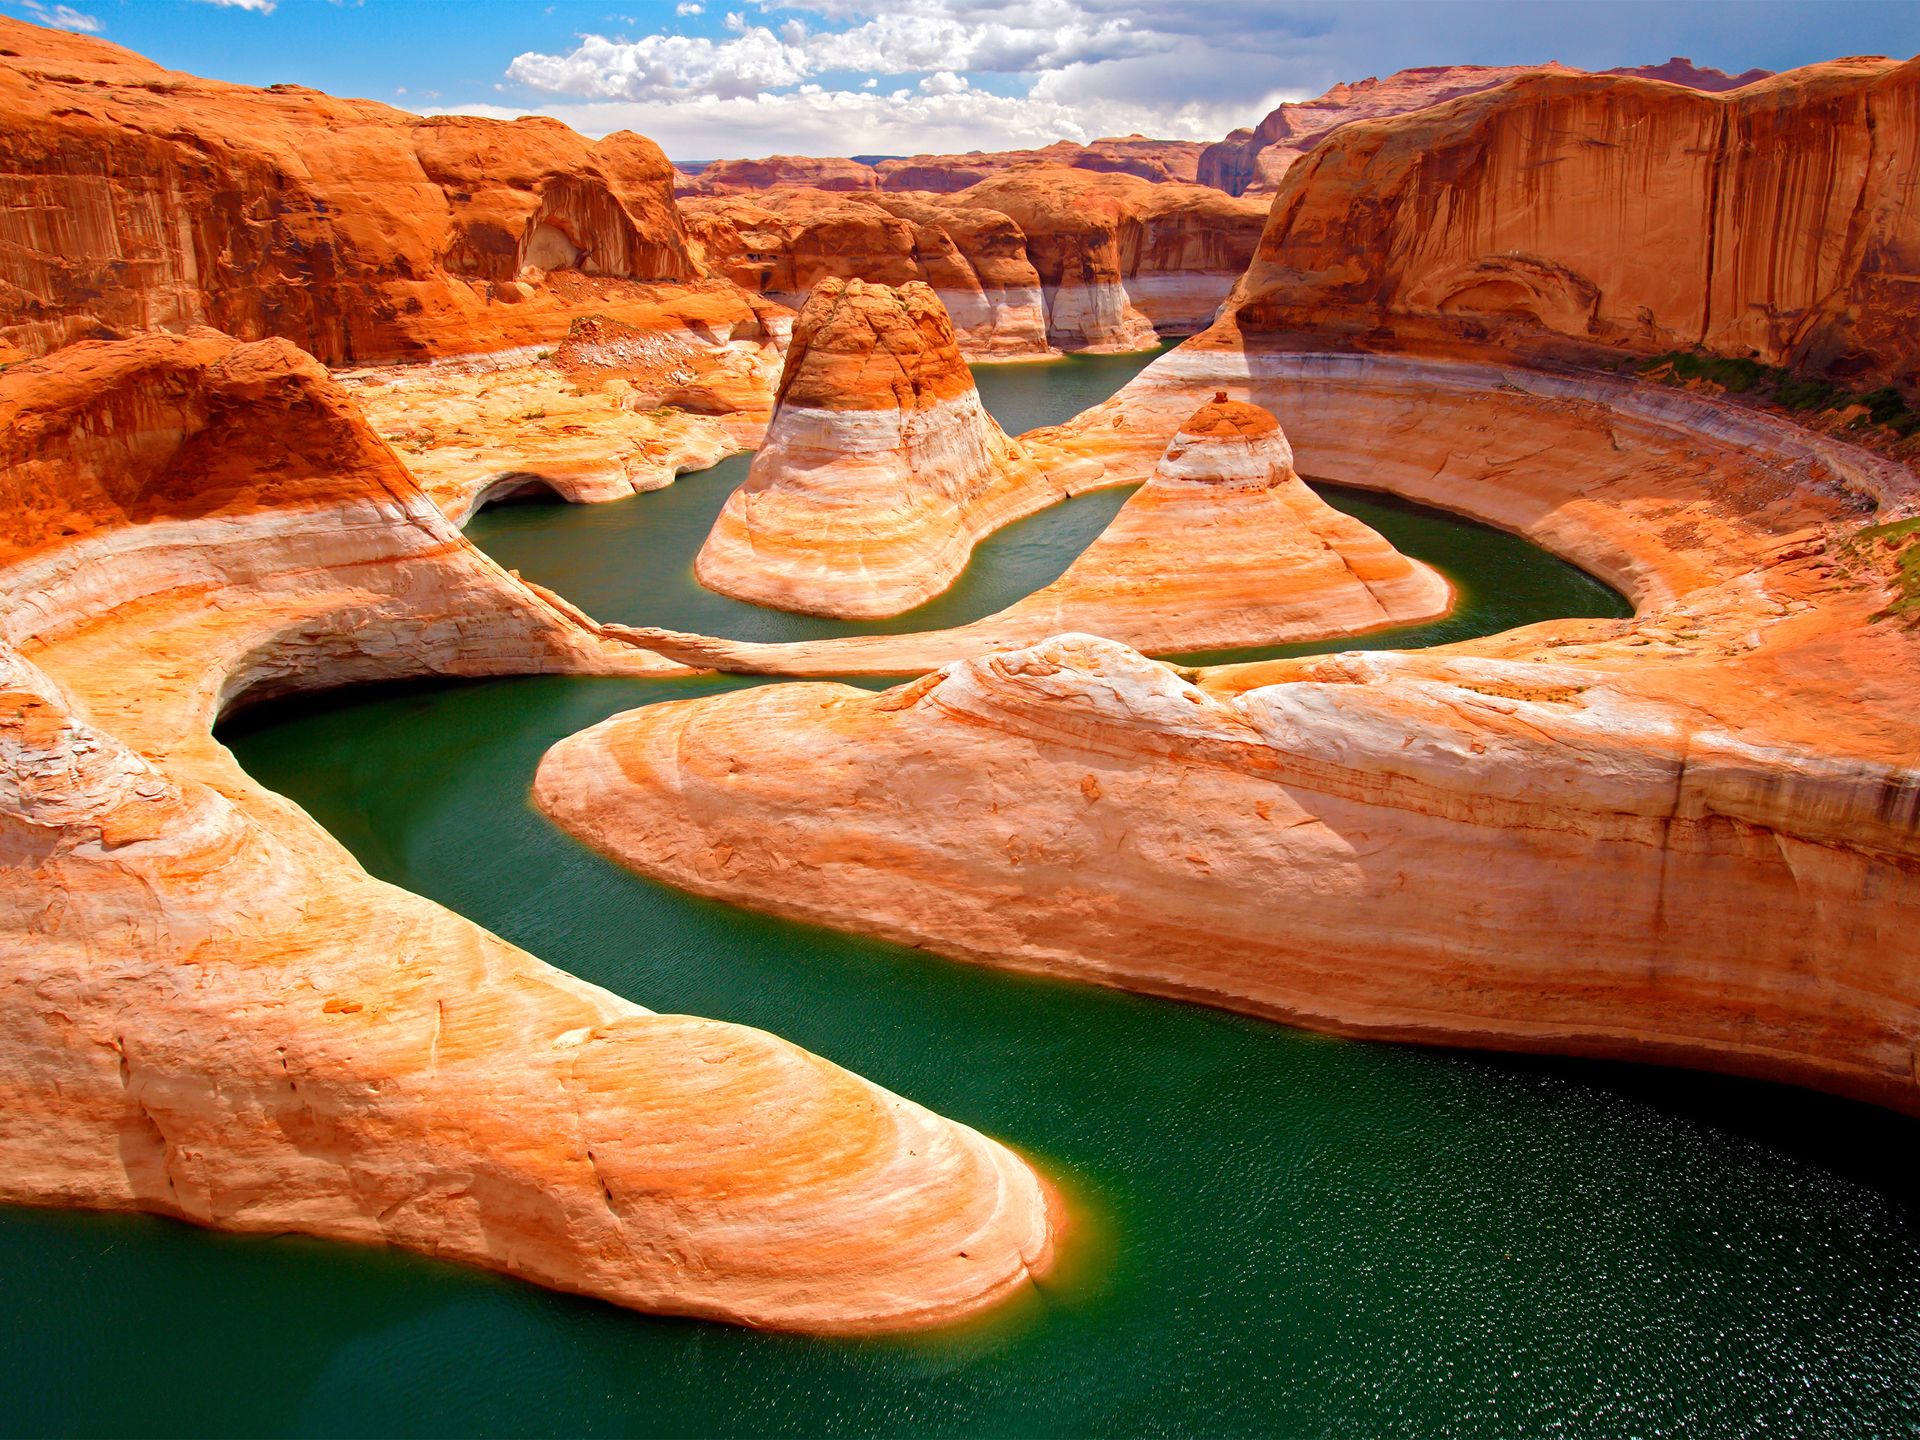 /assets/contentimages/Glen_Canyon_National_Recreation_Area.jpg